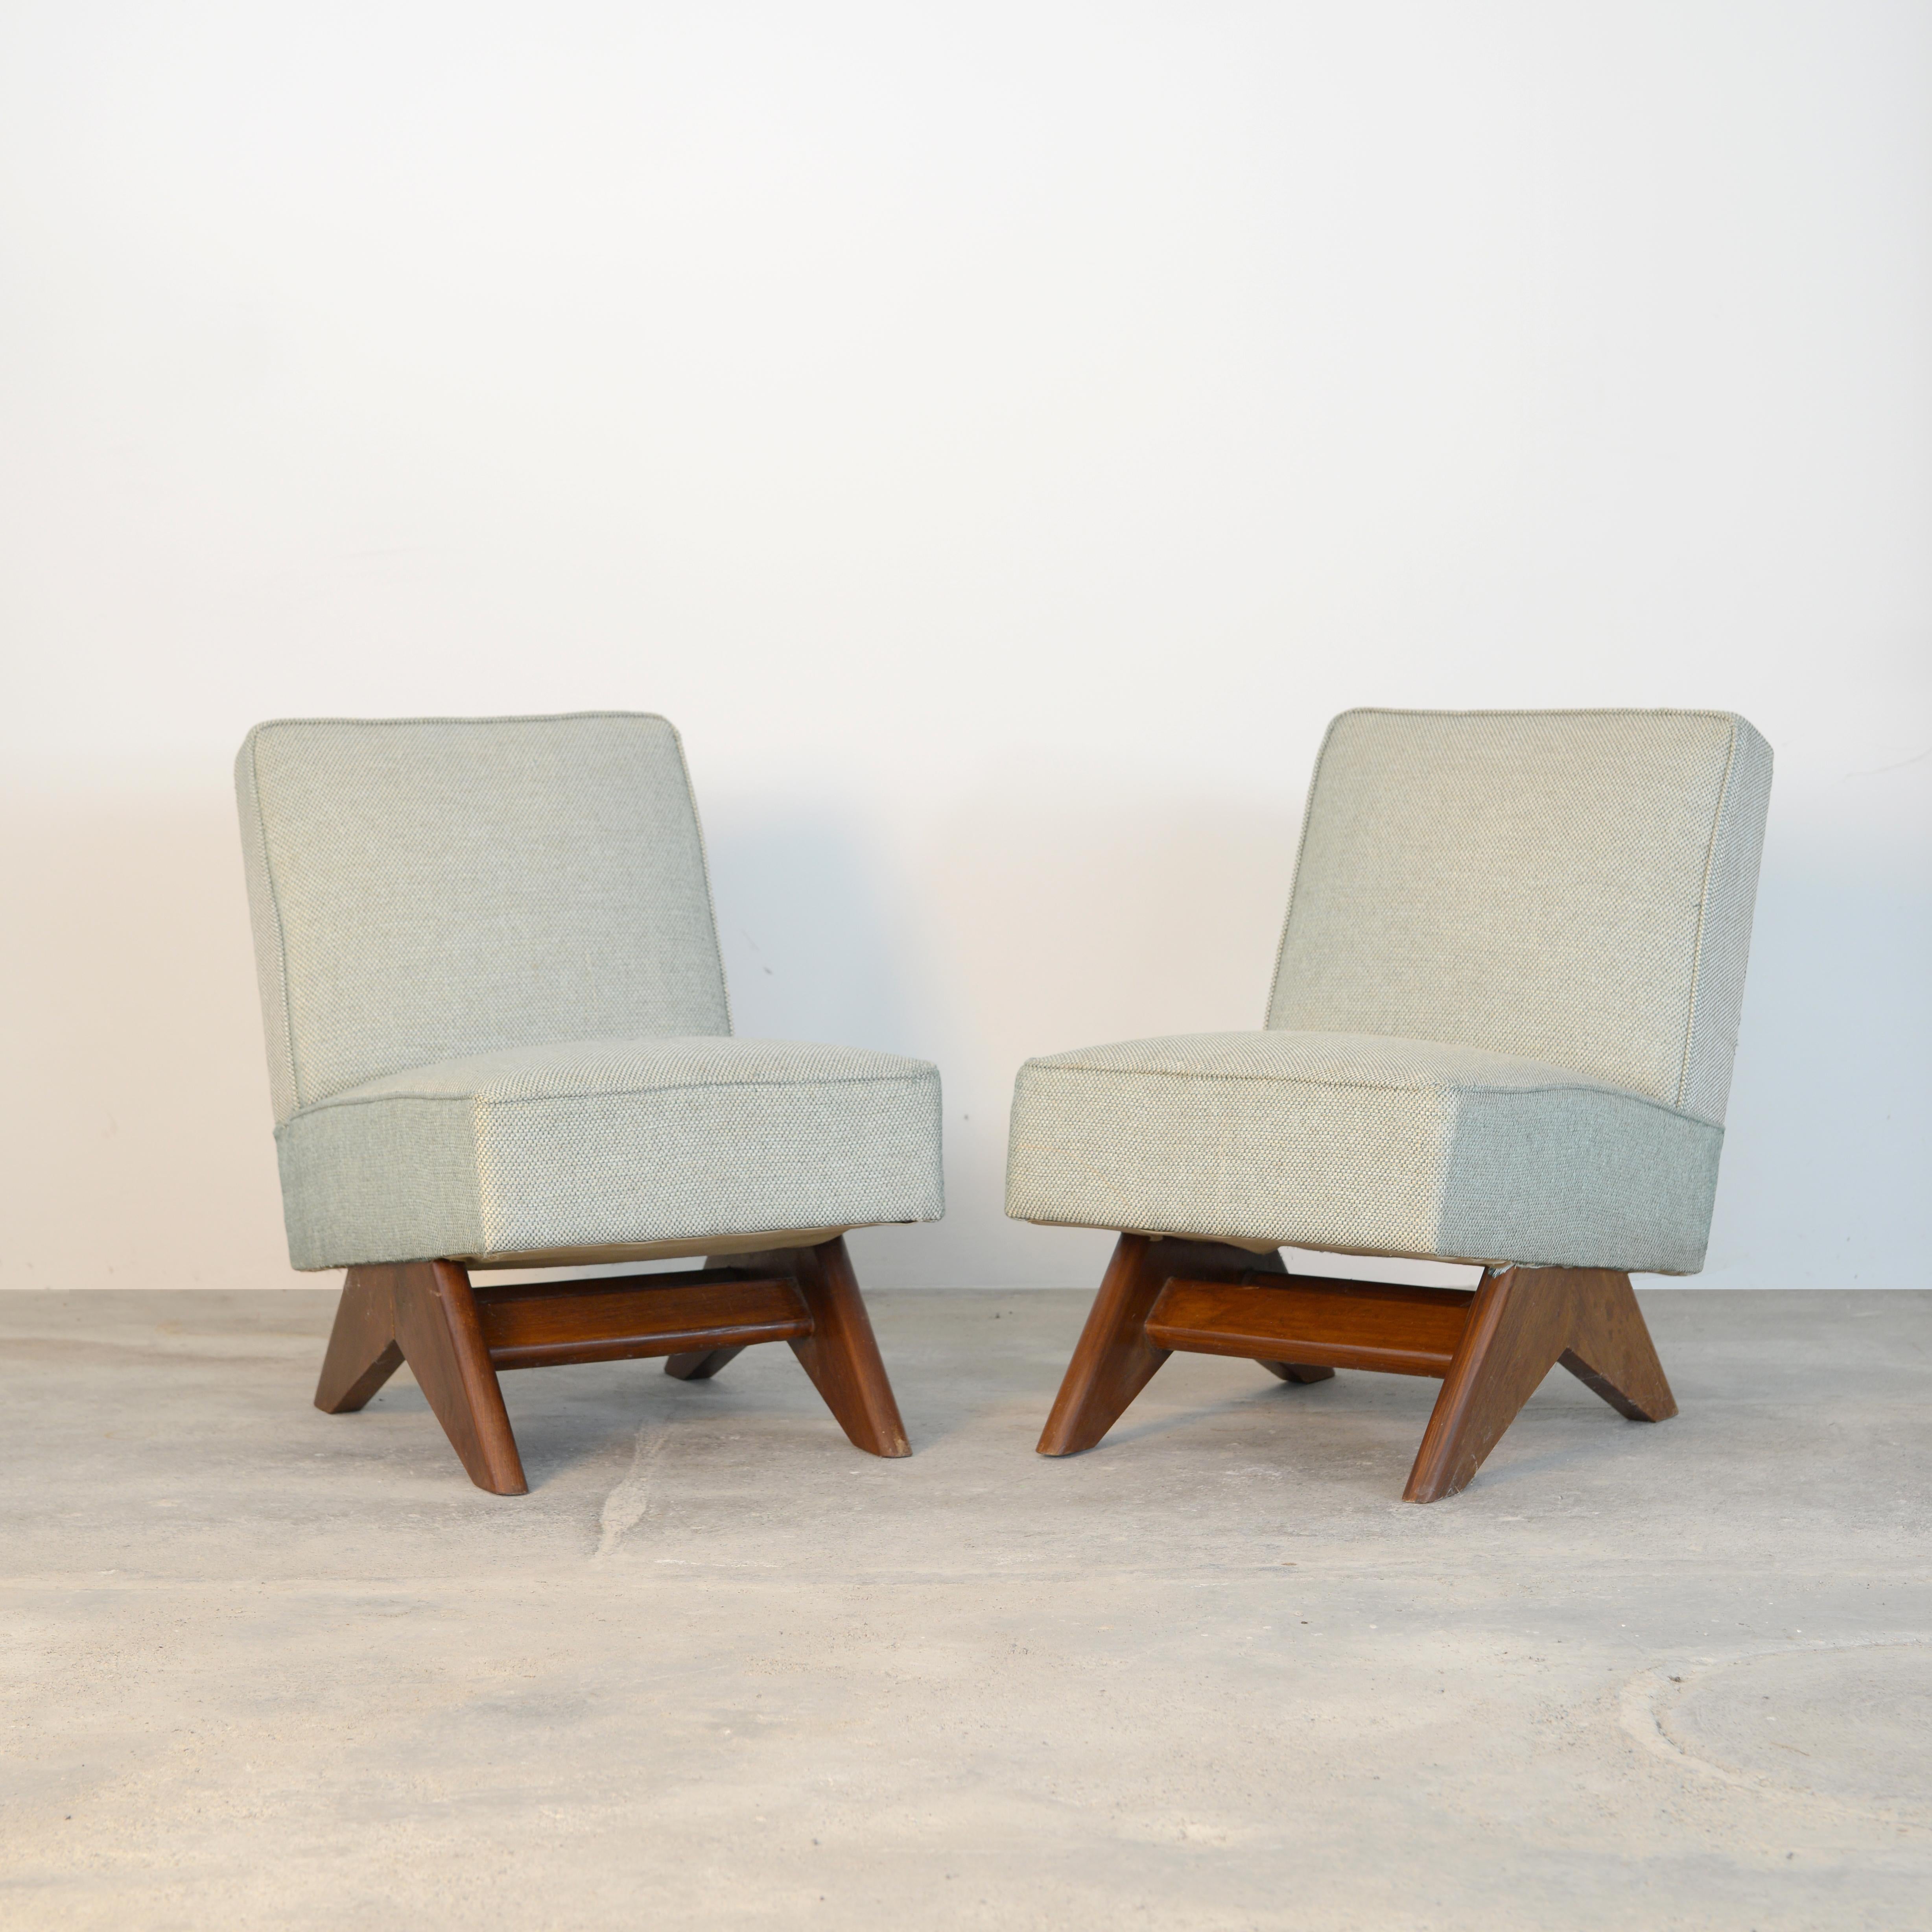 Cowhide Two Pierre Jeanneret Sofa Chairs / Authentic Mid-Century Modern, Chandigarh For Sale